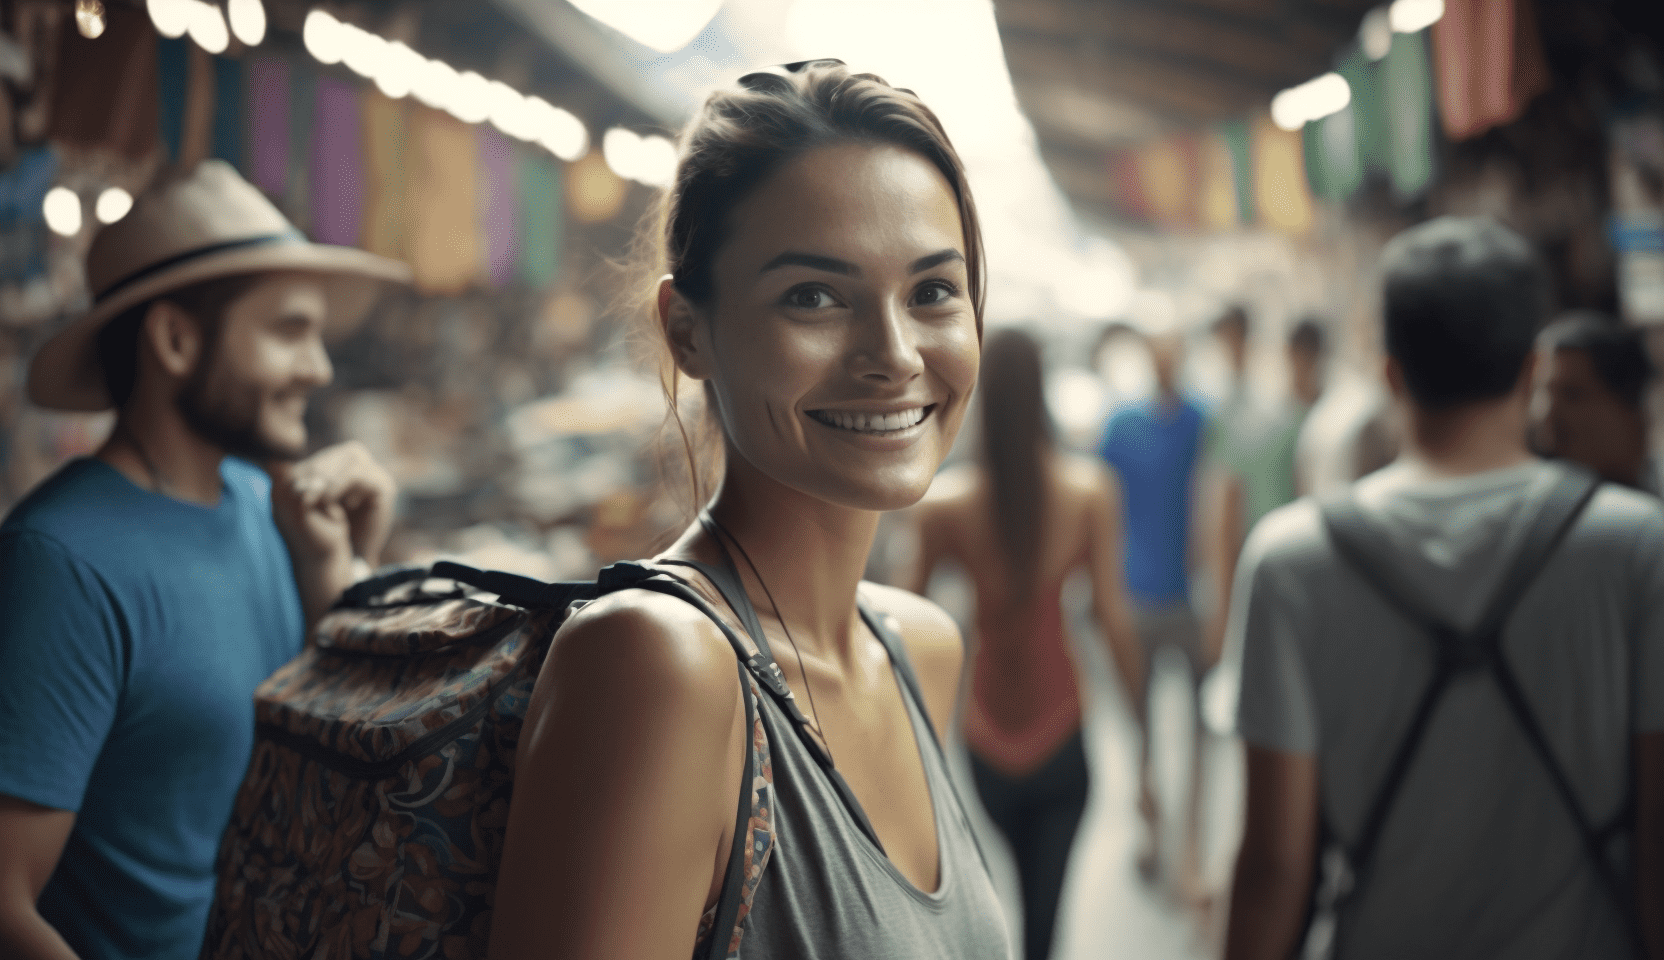 7 Tips for Staying safe When Travelling Solo